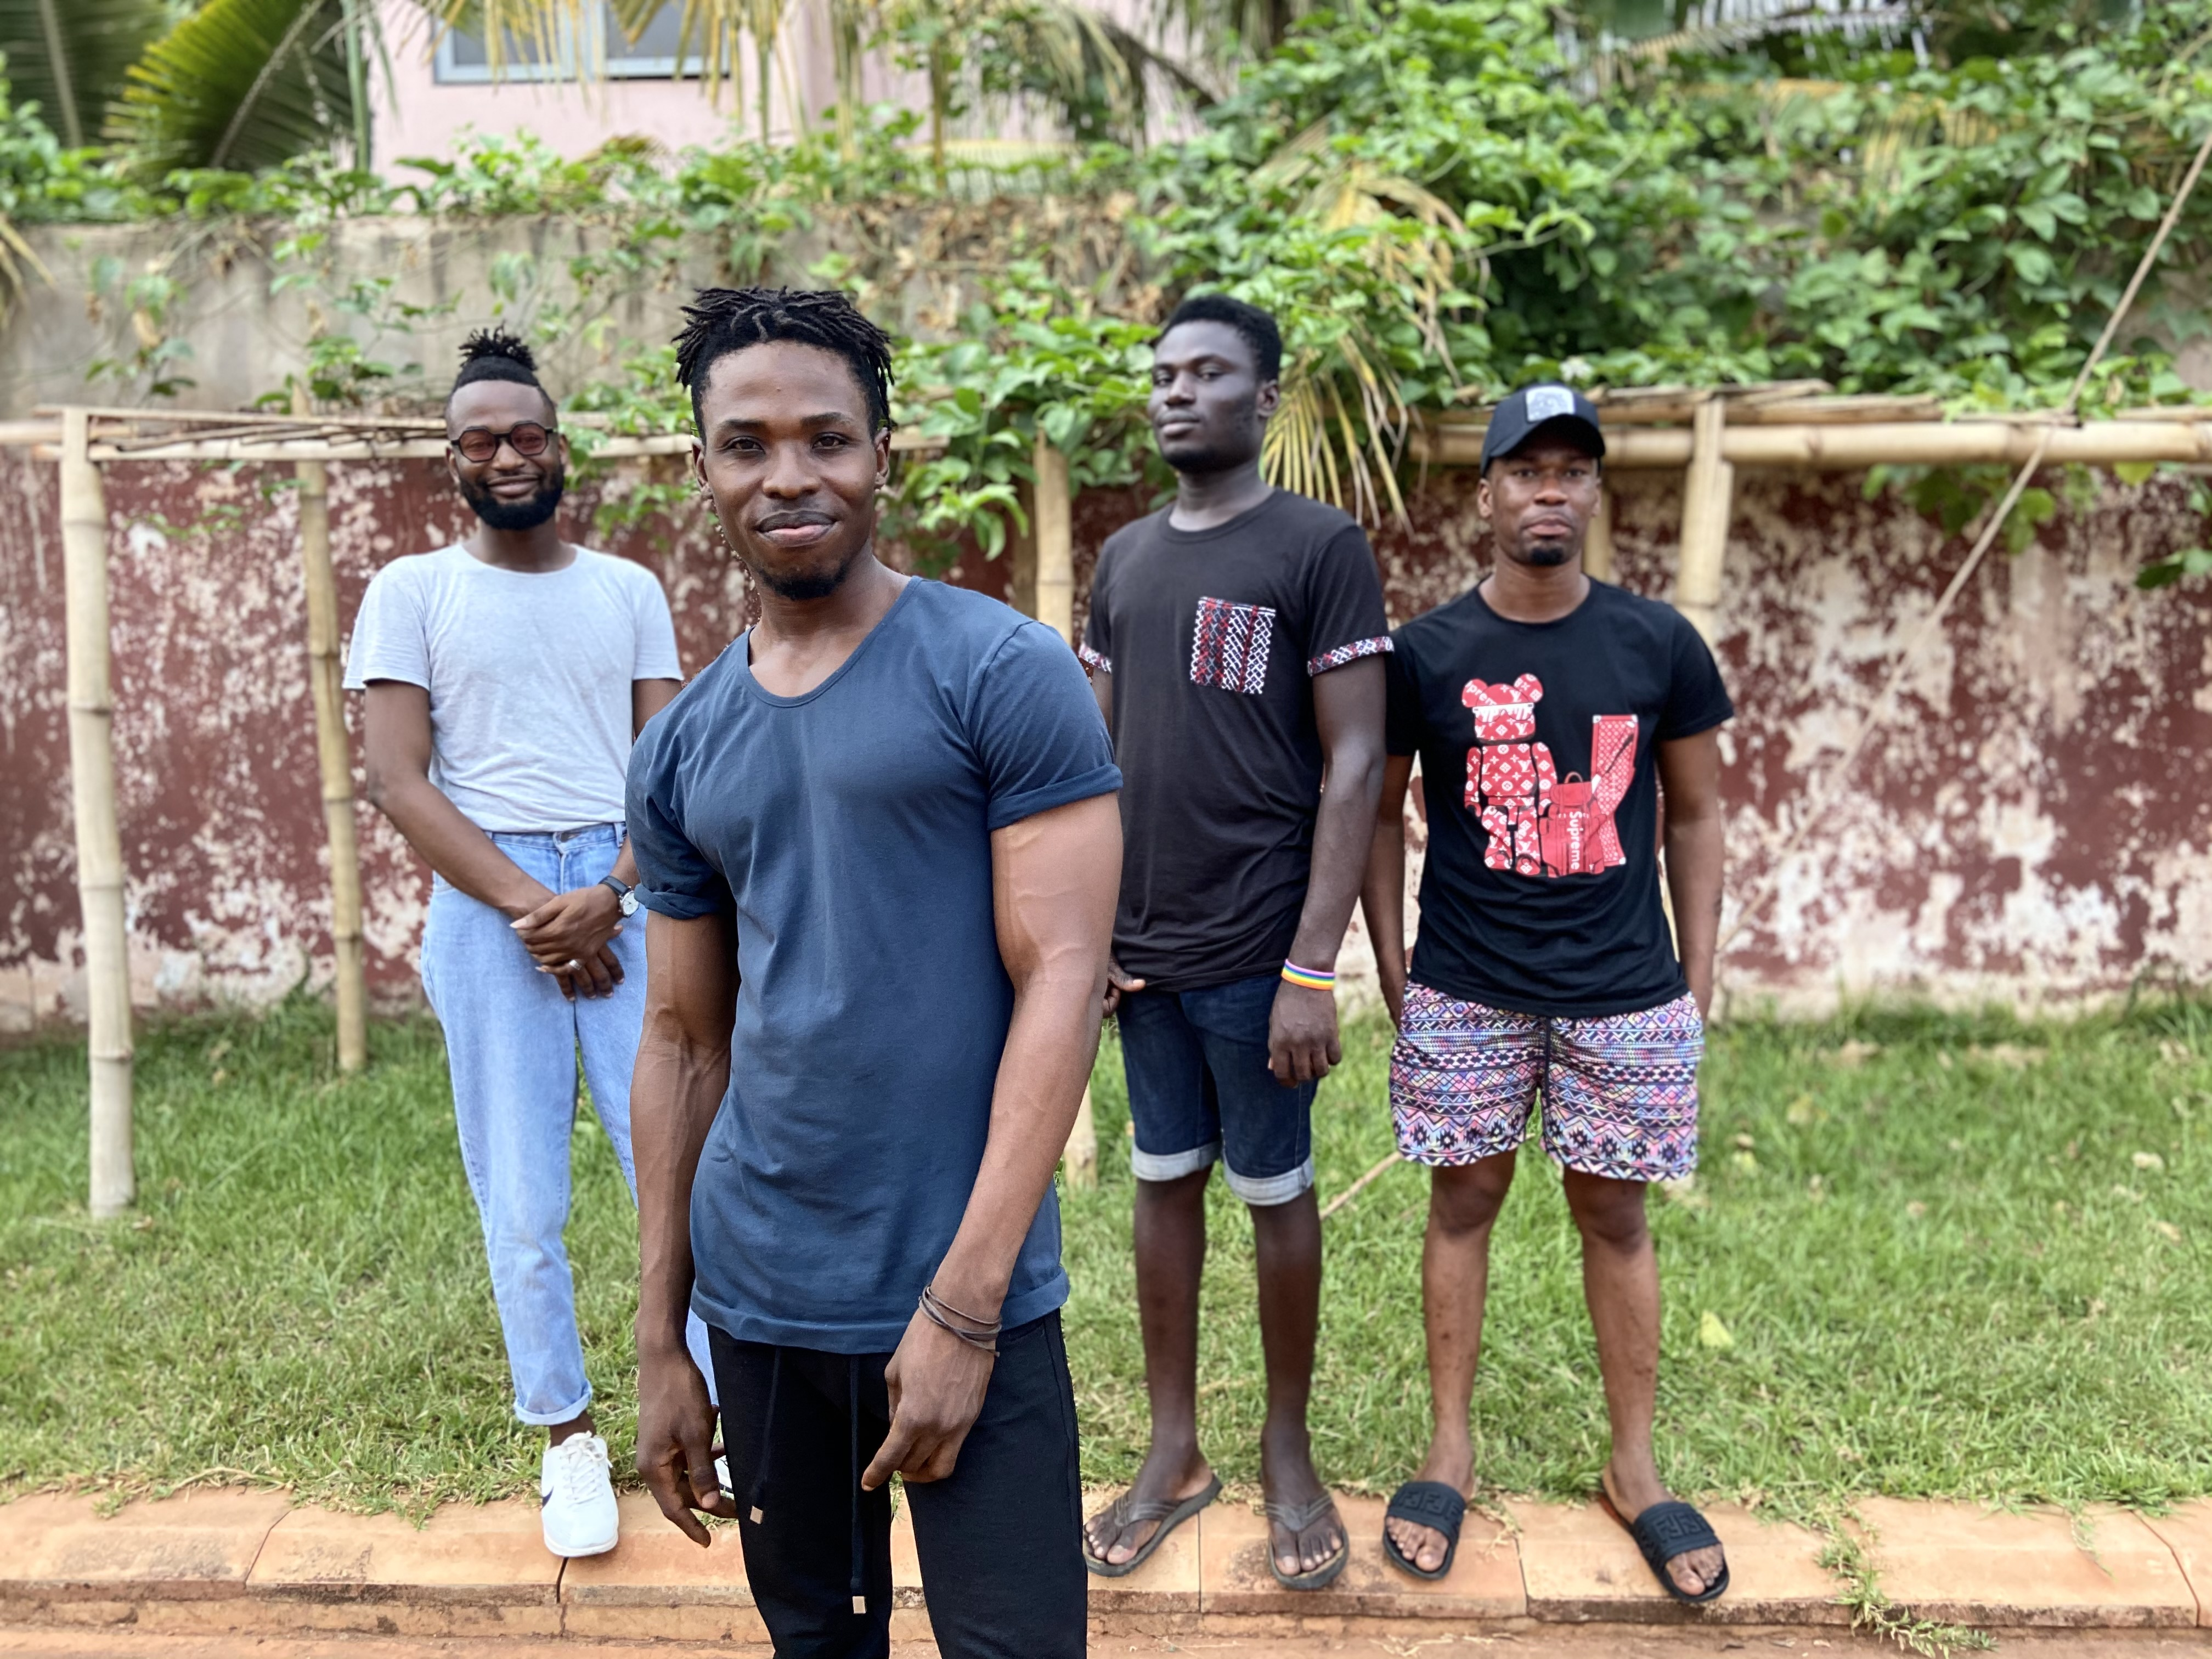 2 March 2020, Accra, Ghana: Pictured, from left, are LGBT+ Rights Ghana members, Mohammed Abdul-Wadud, Alex Kofi Donkor (front), David Larbi and Halil Mohammed. The group has recently been forced into hiding as a result of its activism. (Image by Carl Collison)